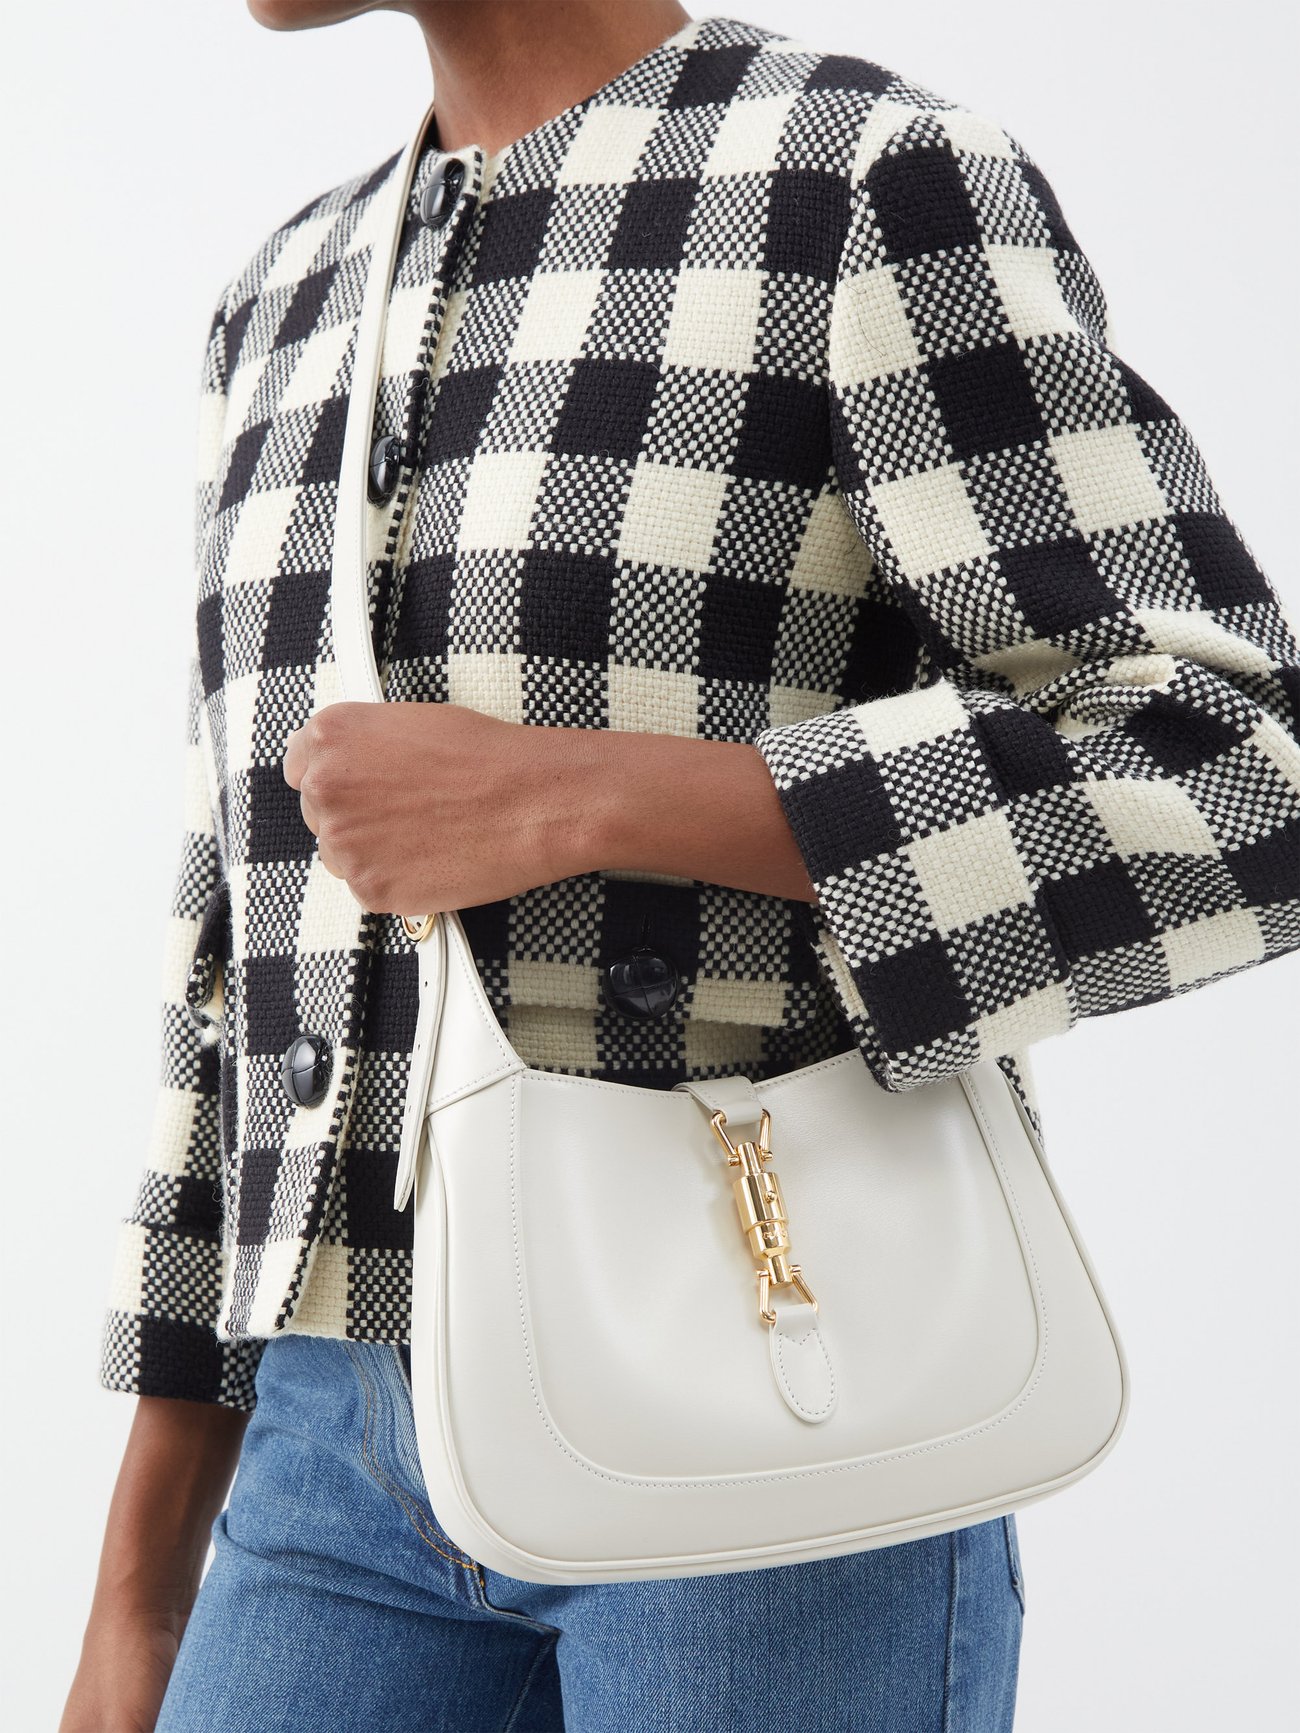 White Jackie 1961 small leather shoulder bag, Gucci